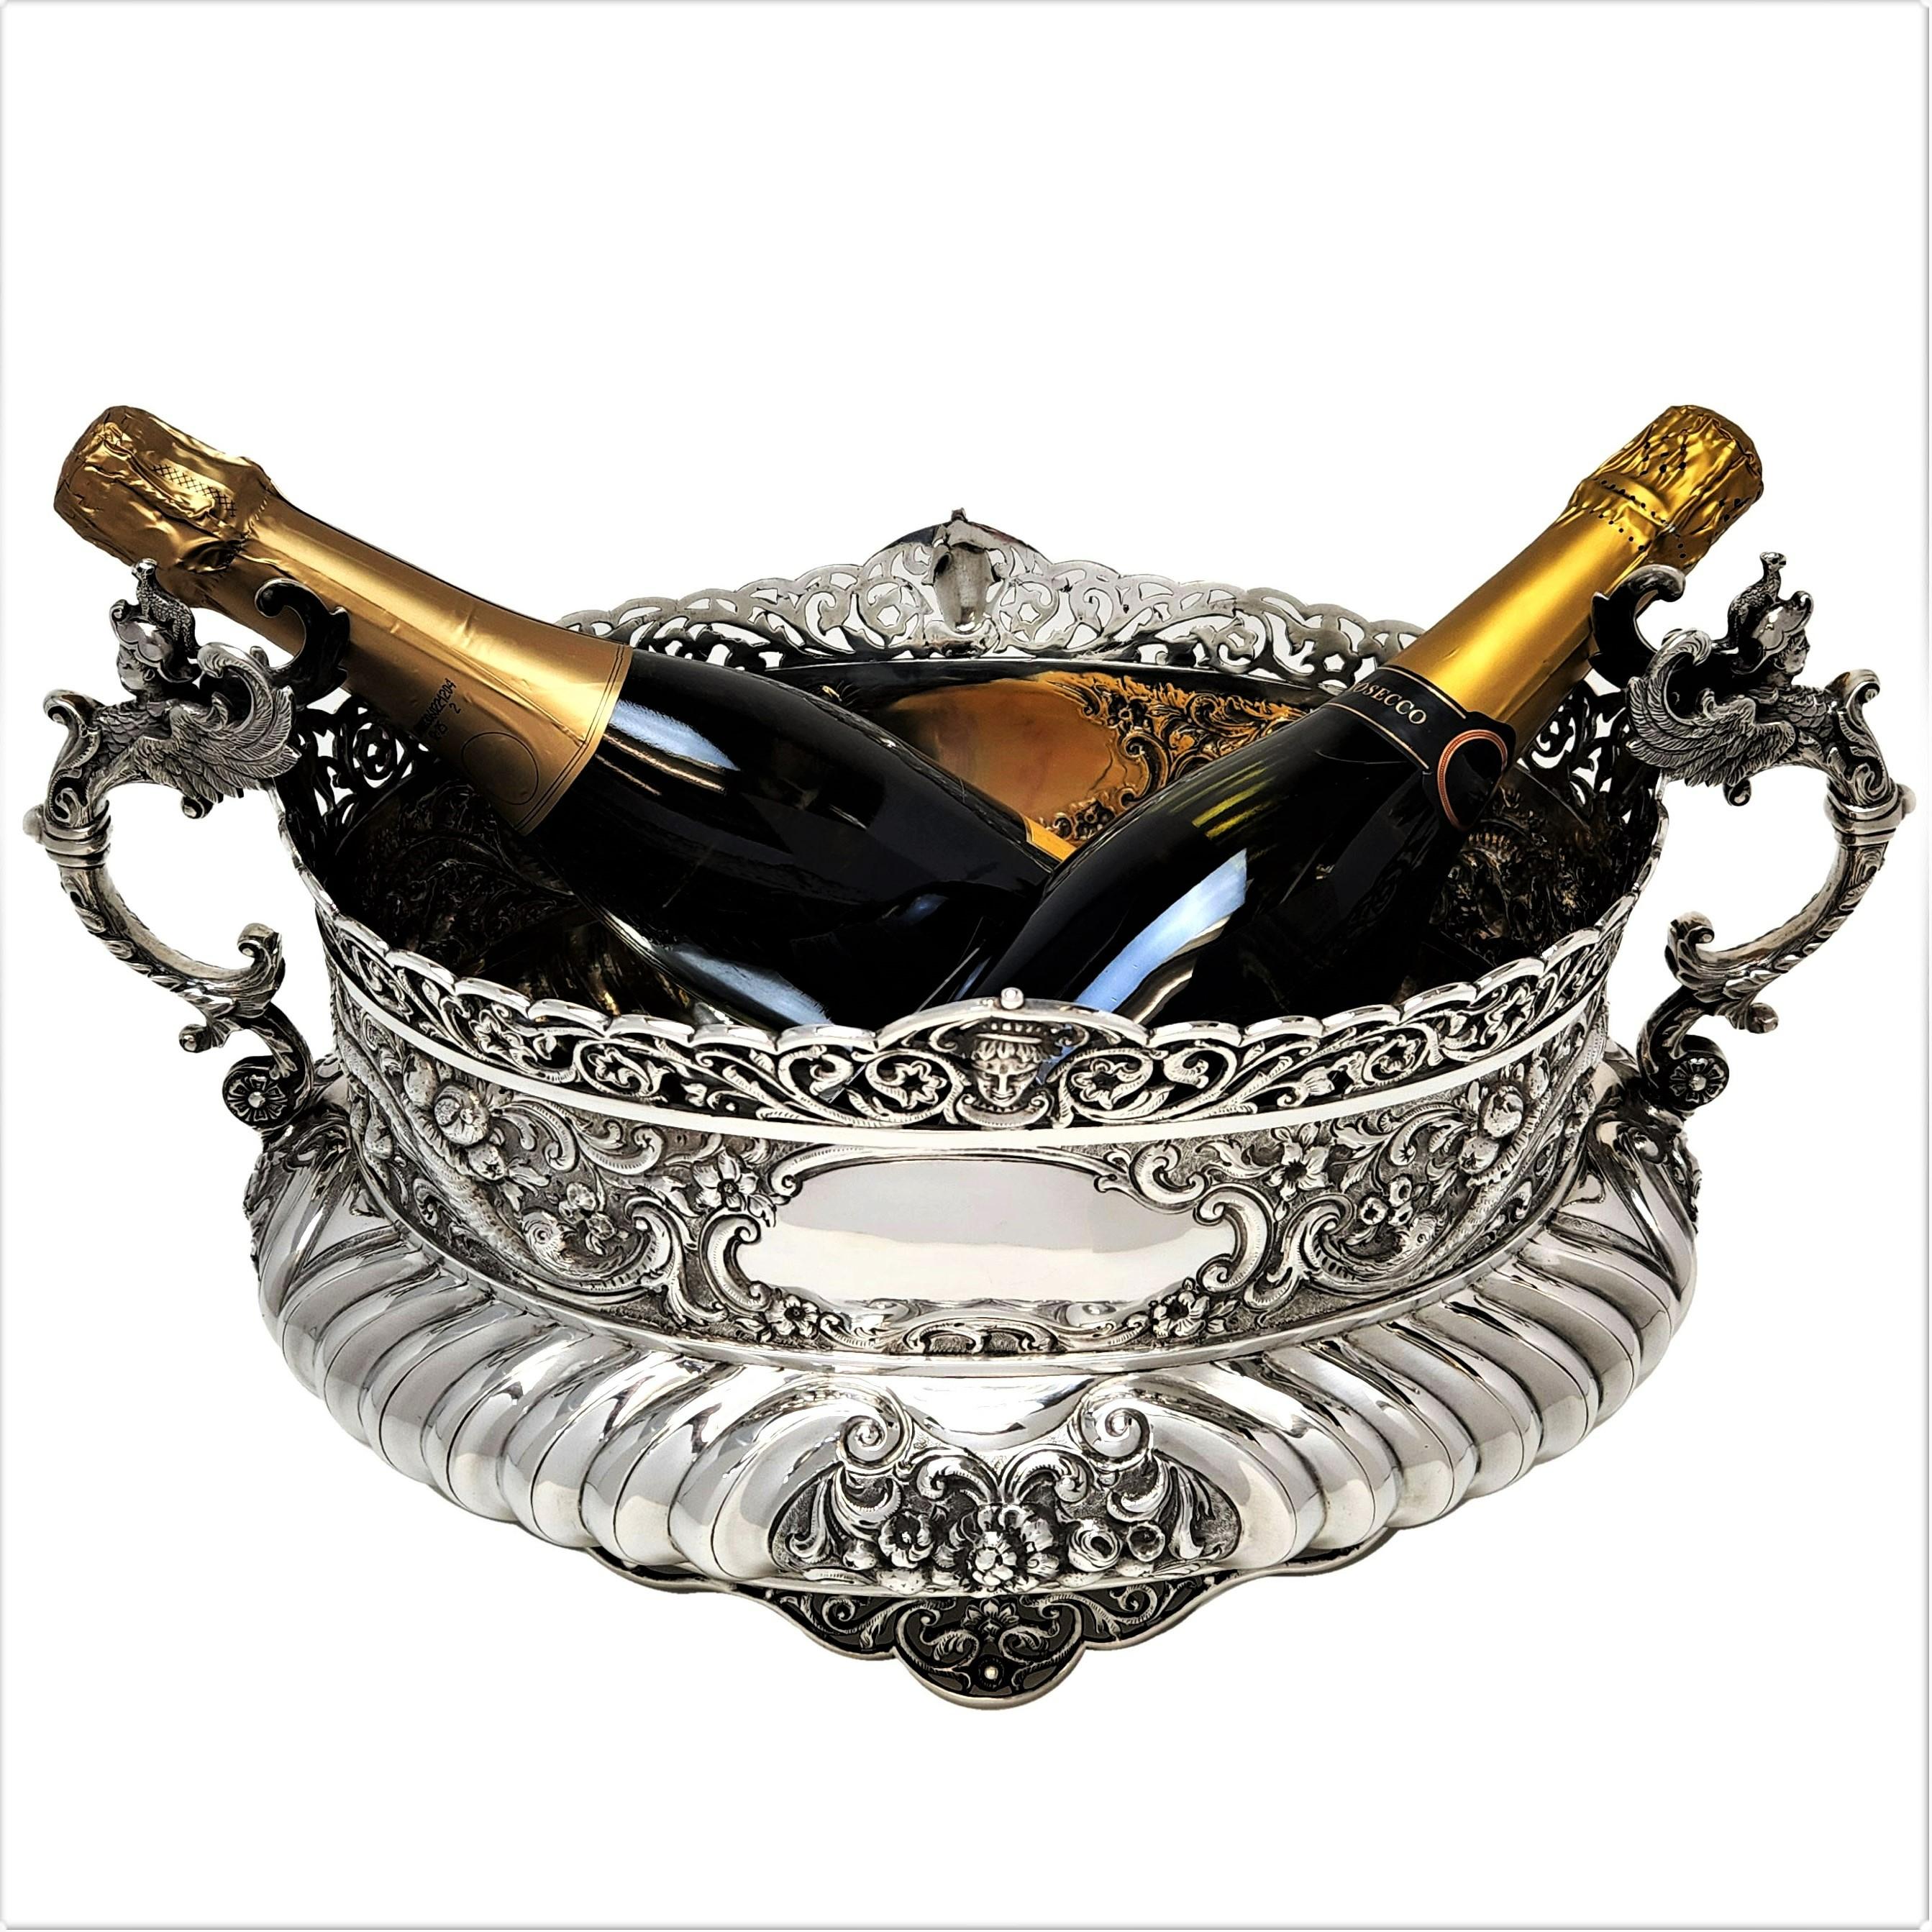 19th Century Antique Victorian Silver Bowl Centrepiece on Plinth 1898 Champagne Wine Cooler